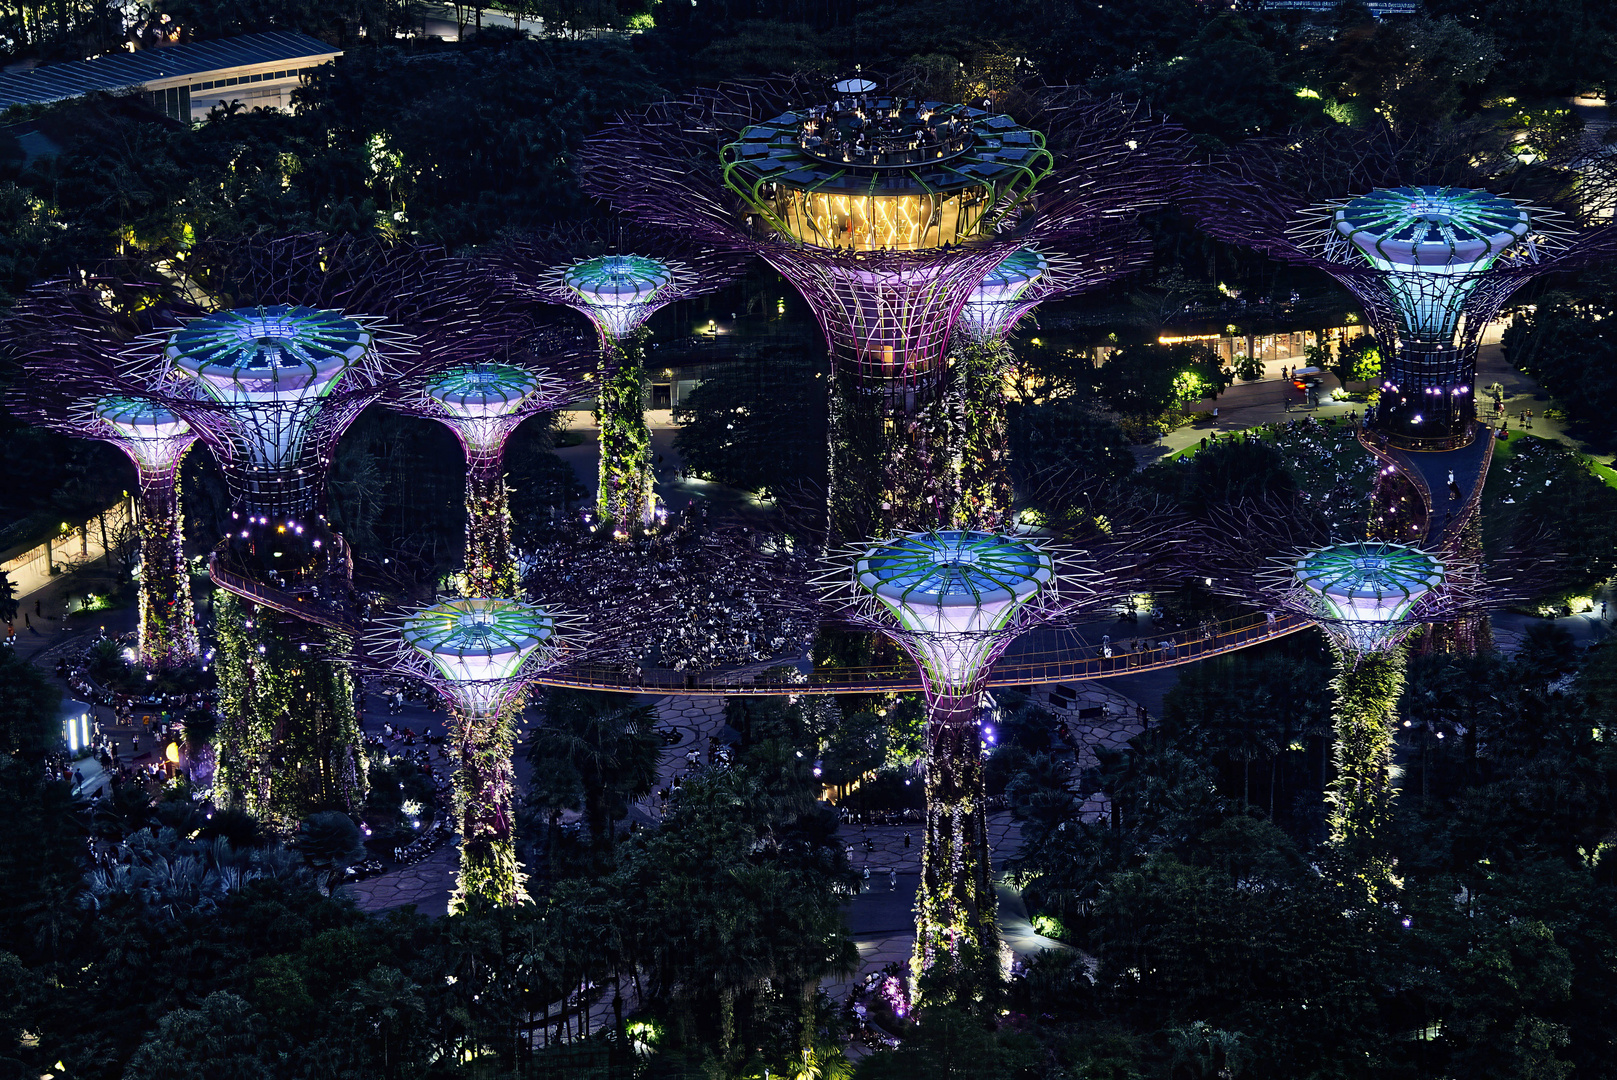 Night over the gardens by the bay